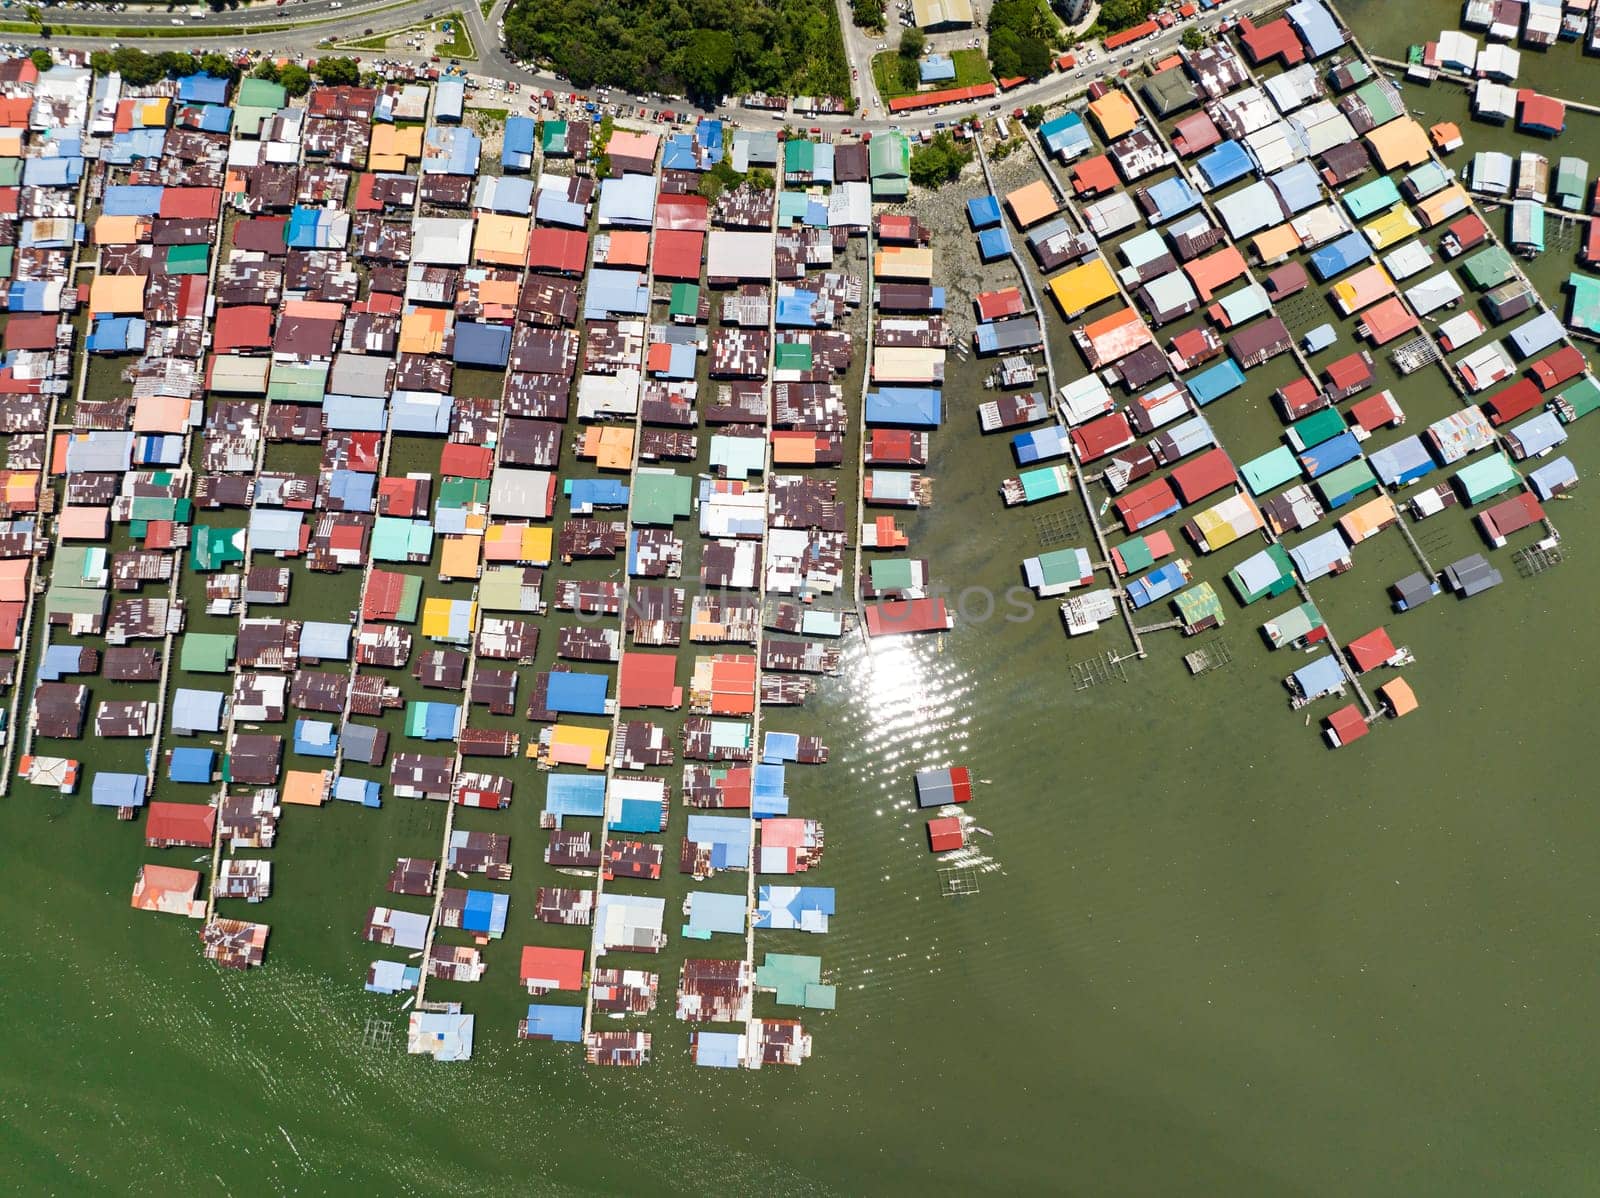 Fishing village on the island of Borneo with houses on stilts in the sea view from above. Sandakan, Malaysia.